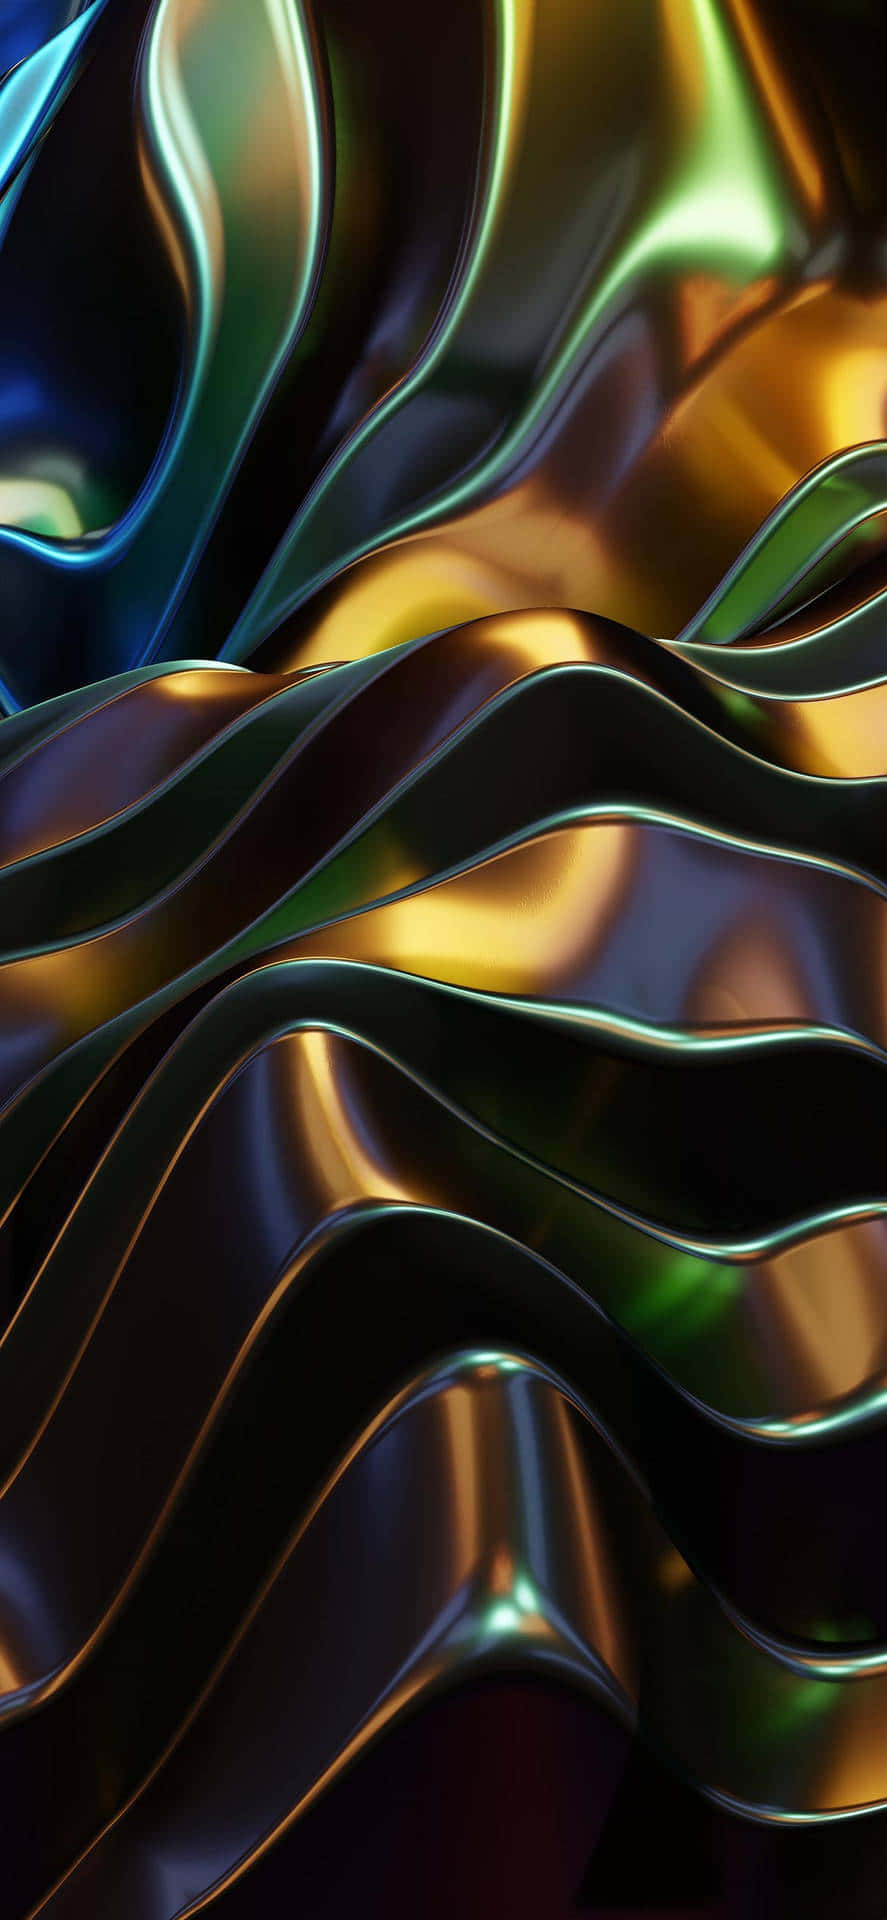 A Colorful Abstract Background With Shiny Metal Wallpaper